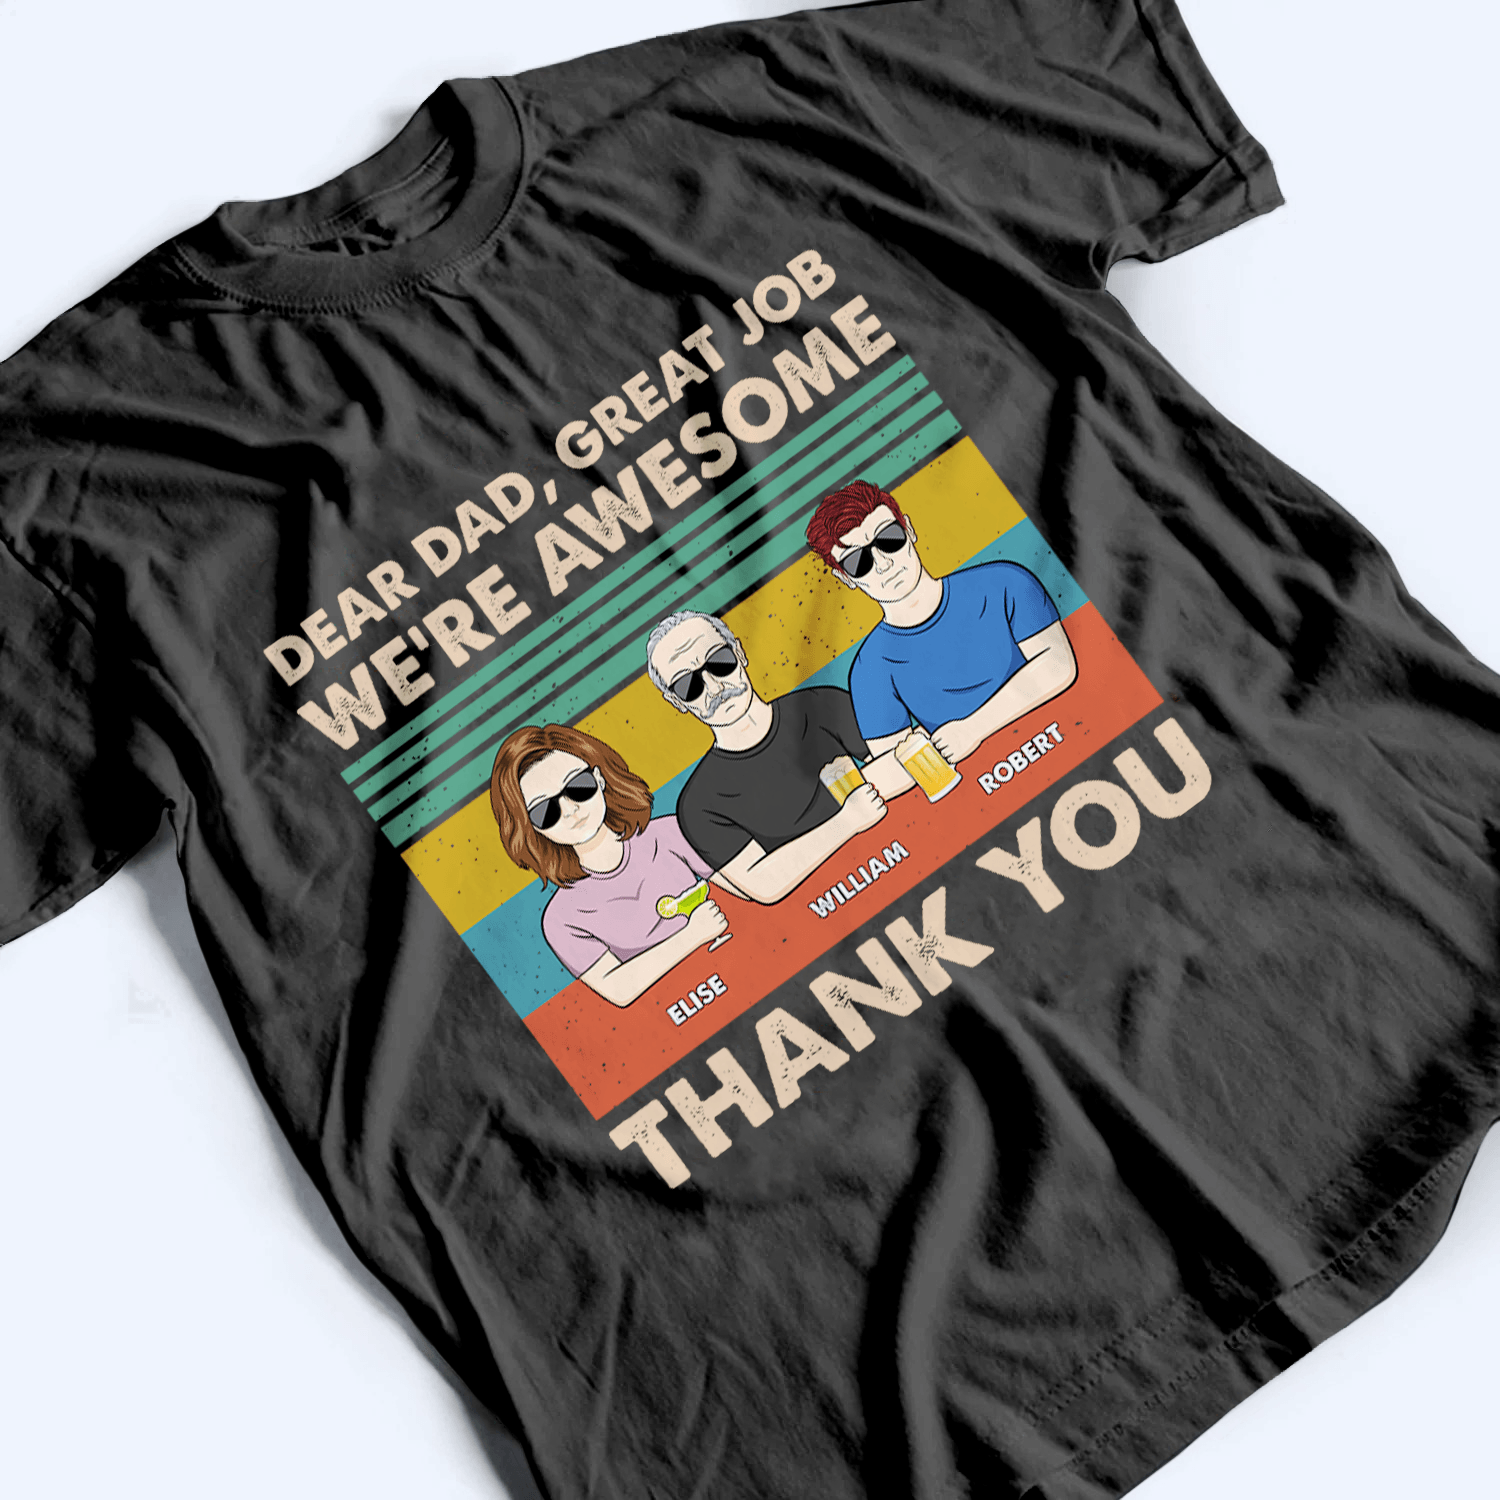 Dear Dad, Great Job We're Awesome Thank You - Personalized Custom T Shirt - Father's Day Gift for Dad, Papa, Grandpa, Daddy, Dada